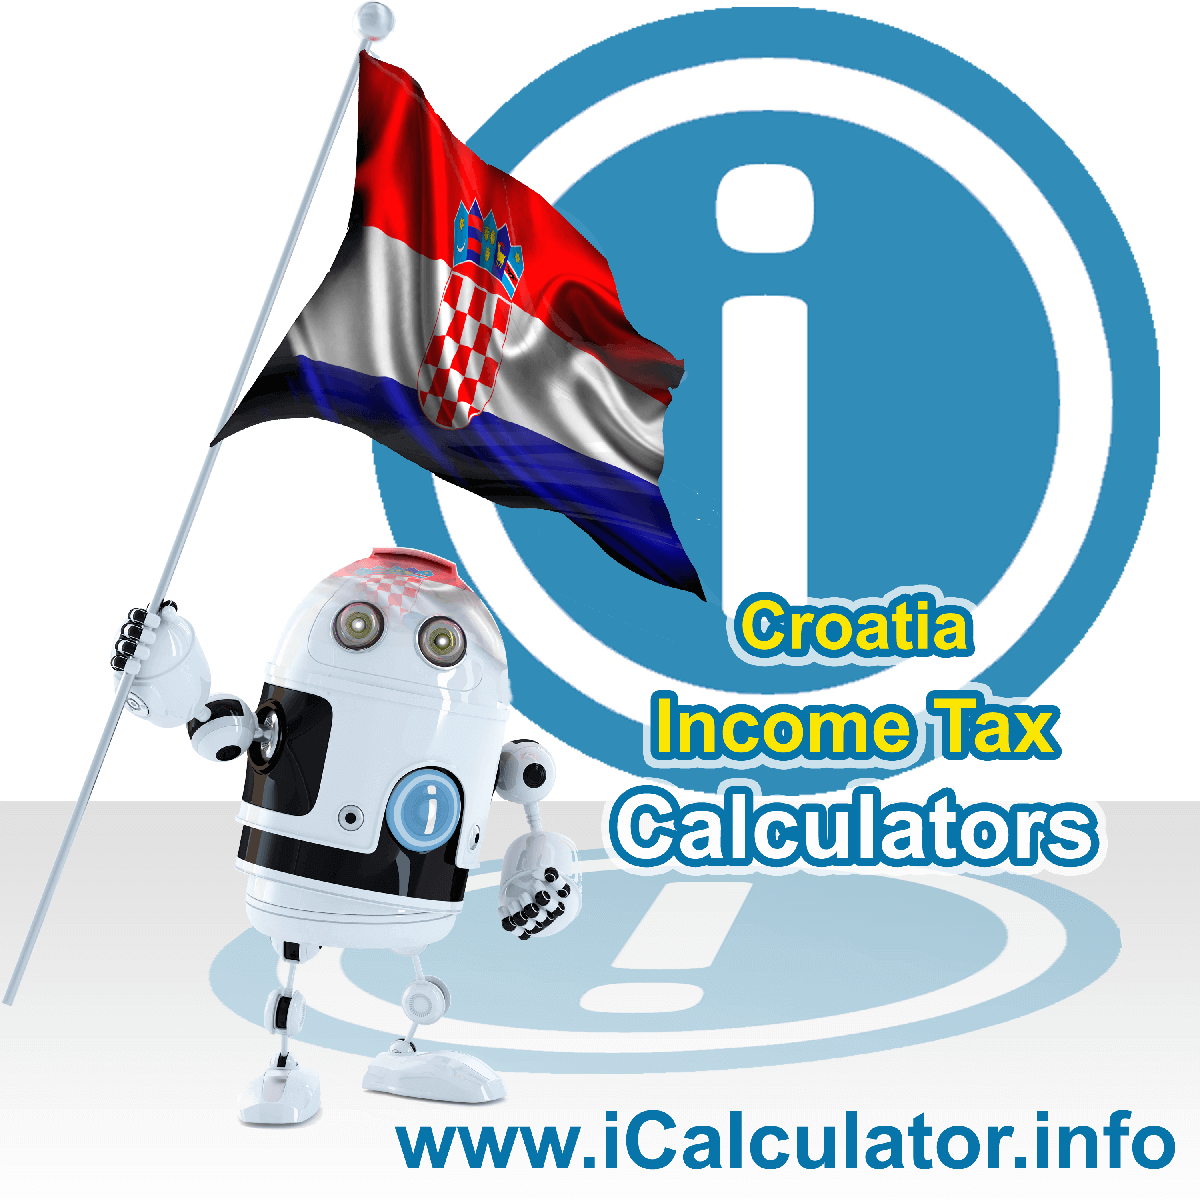 Croatia Income Tax Calculator. This image shows a new employer in Croatia calculating the annual payroll costs based on multiple payroll payments in one year in Croatia using the Croatia income tax calculator to understand their payroll costs in Croatia in 2023